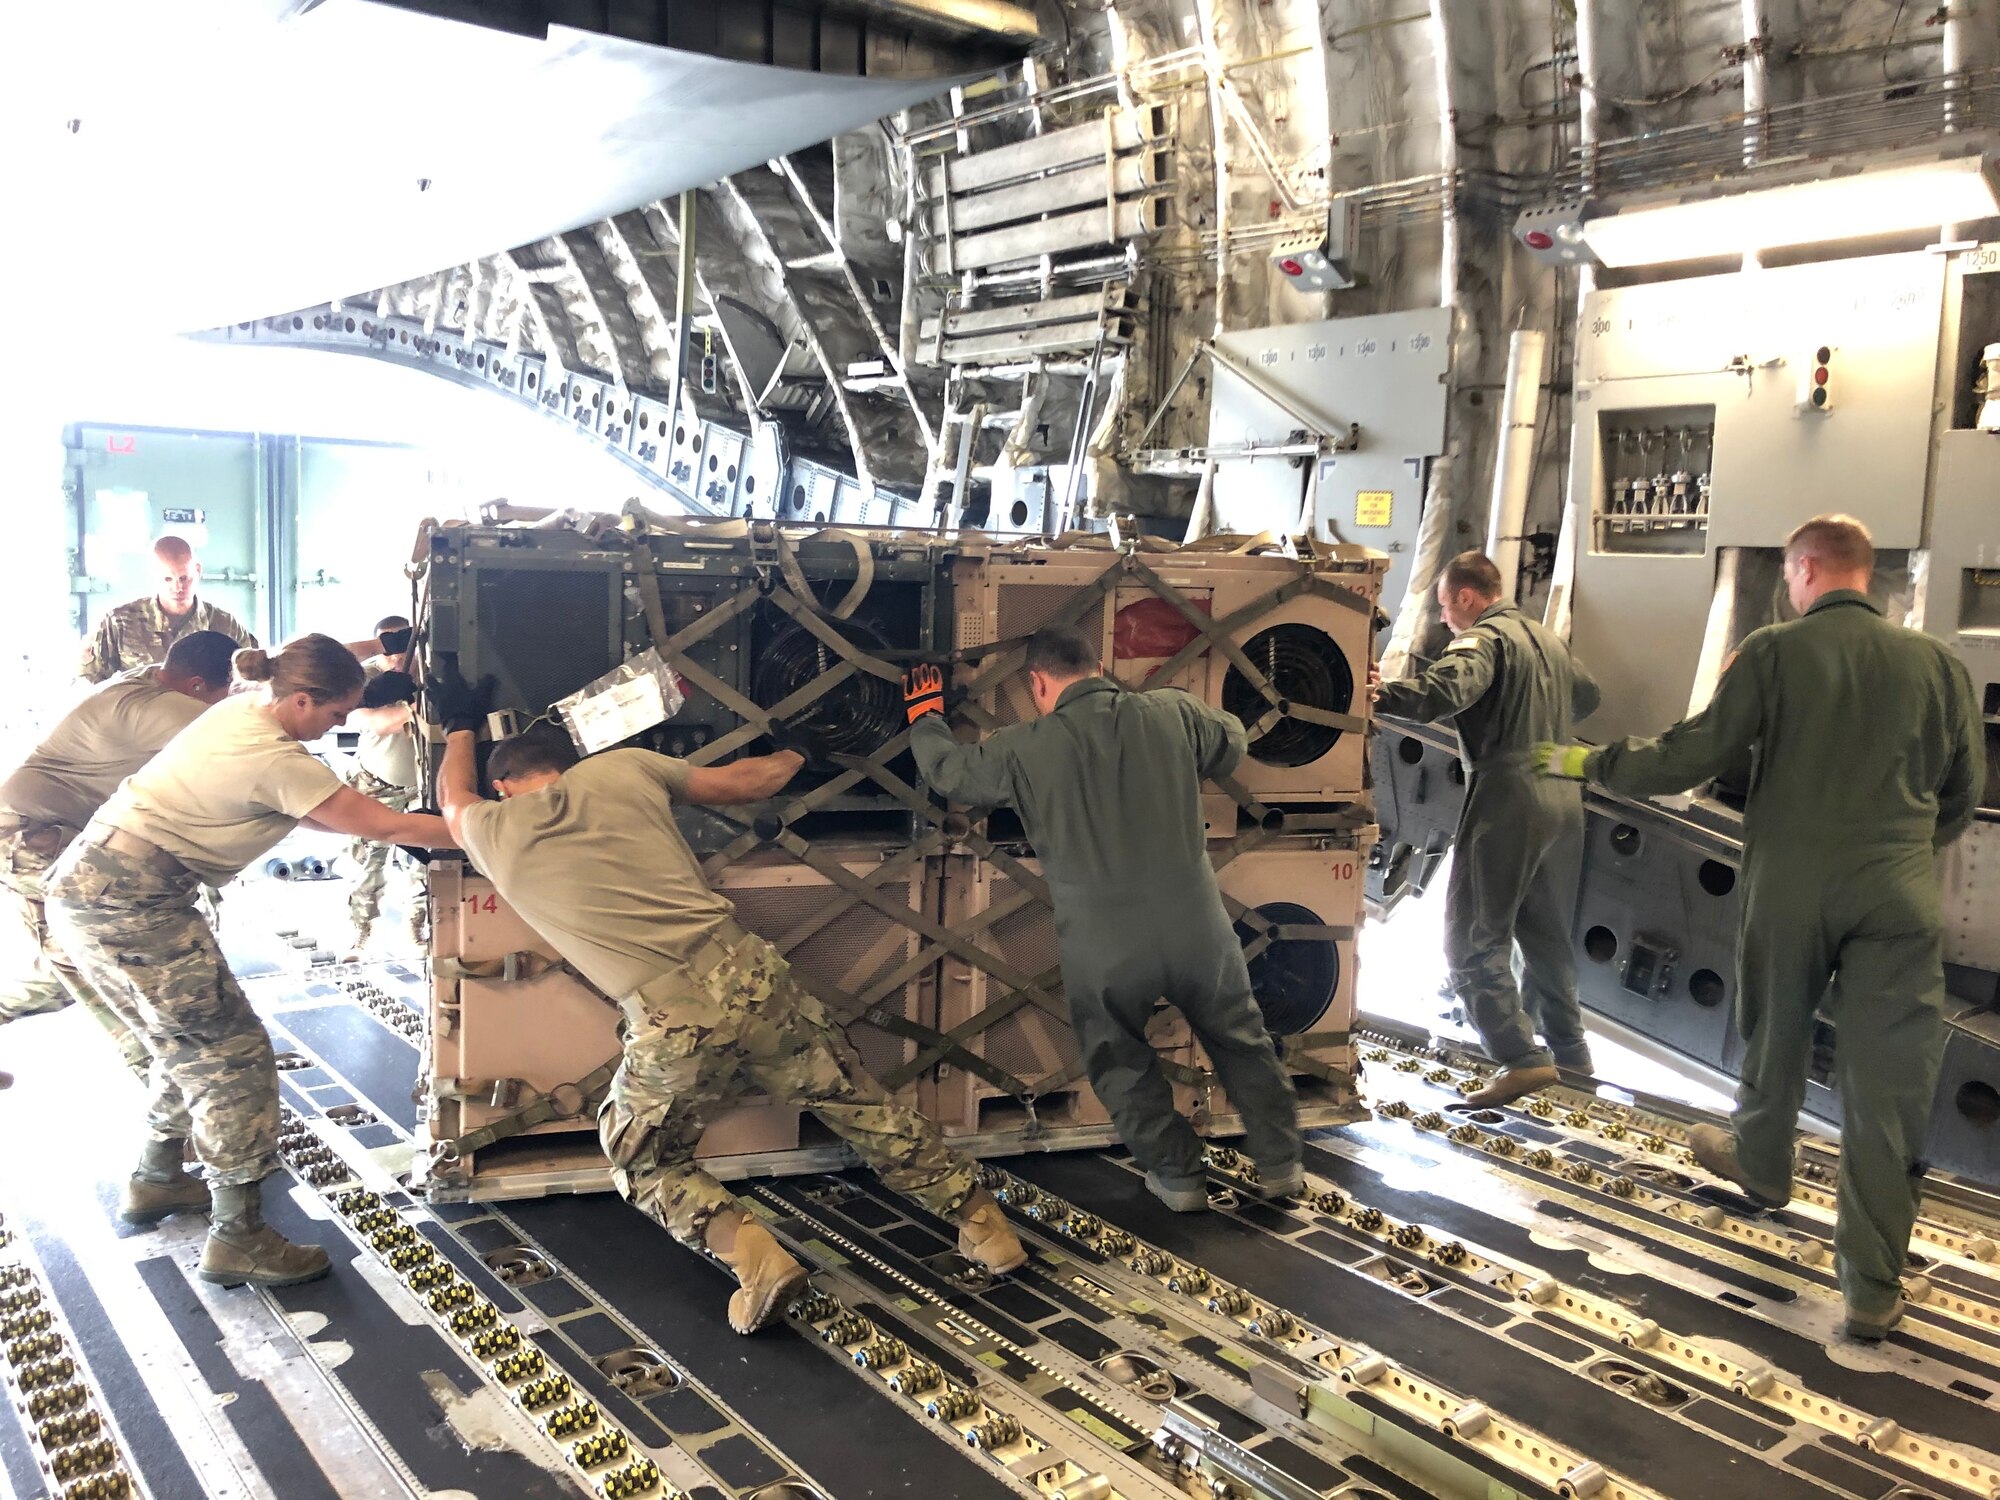 Disaster Relief Bed-Down Sets are loaded on to a C-17 Globemaster III aircraft at the 156th Airlift Wing, Puerto Rico Air National Guard unit, March 24, 2017. The wing flew two C-17’s to Puerto Rico to load and transport two DRBS’s to the 200th RED HORSE Squadron in Mansfield, Ohio. The DRBS’s were deployed to Puerto Rico after an earthquake there in January. (photos courtesy of Capt. Kevin Rudisill)